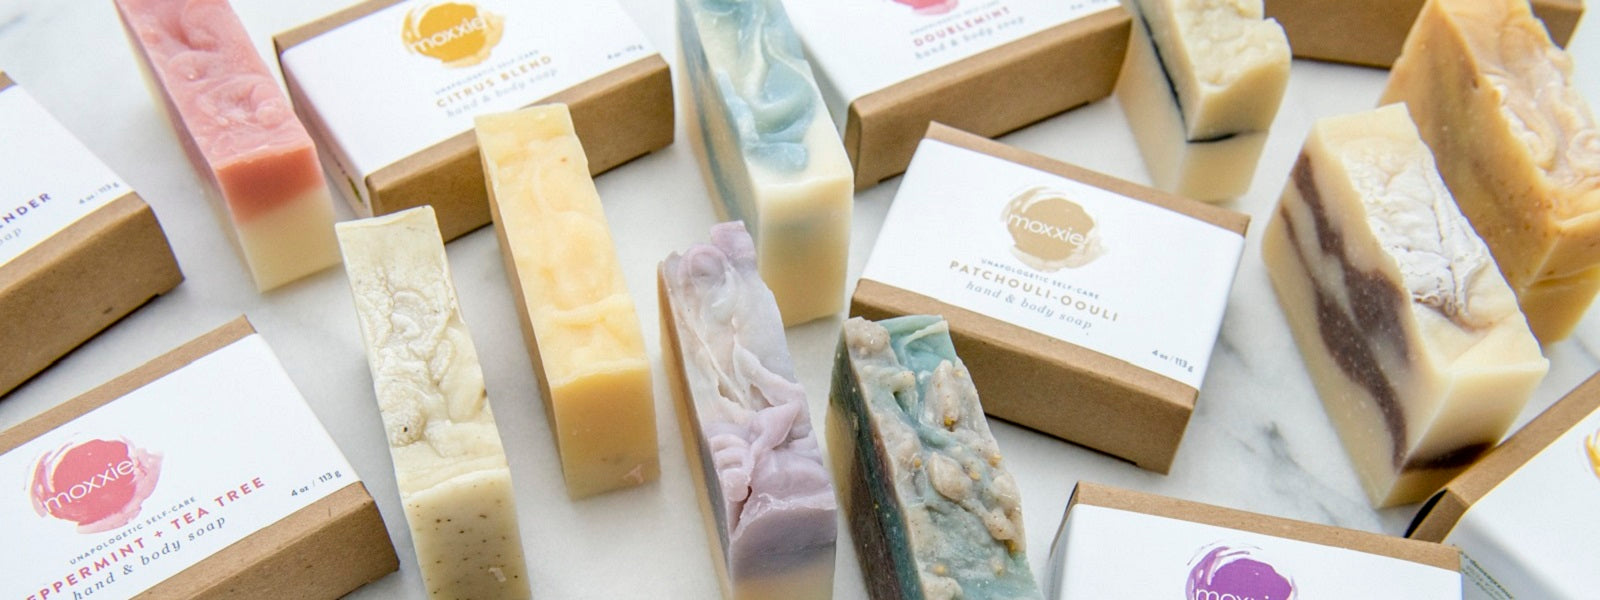 moxxie handcrafted botanical natural bar soaps